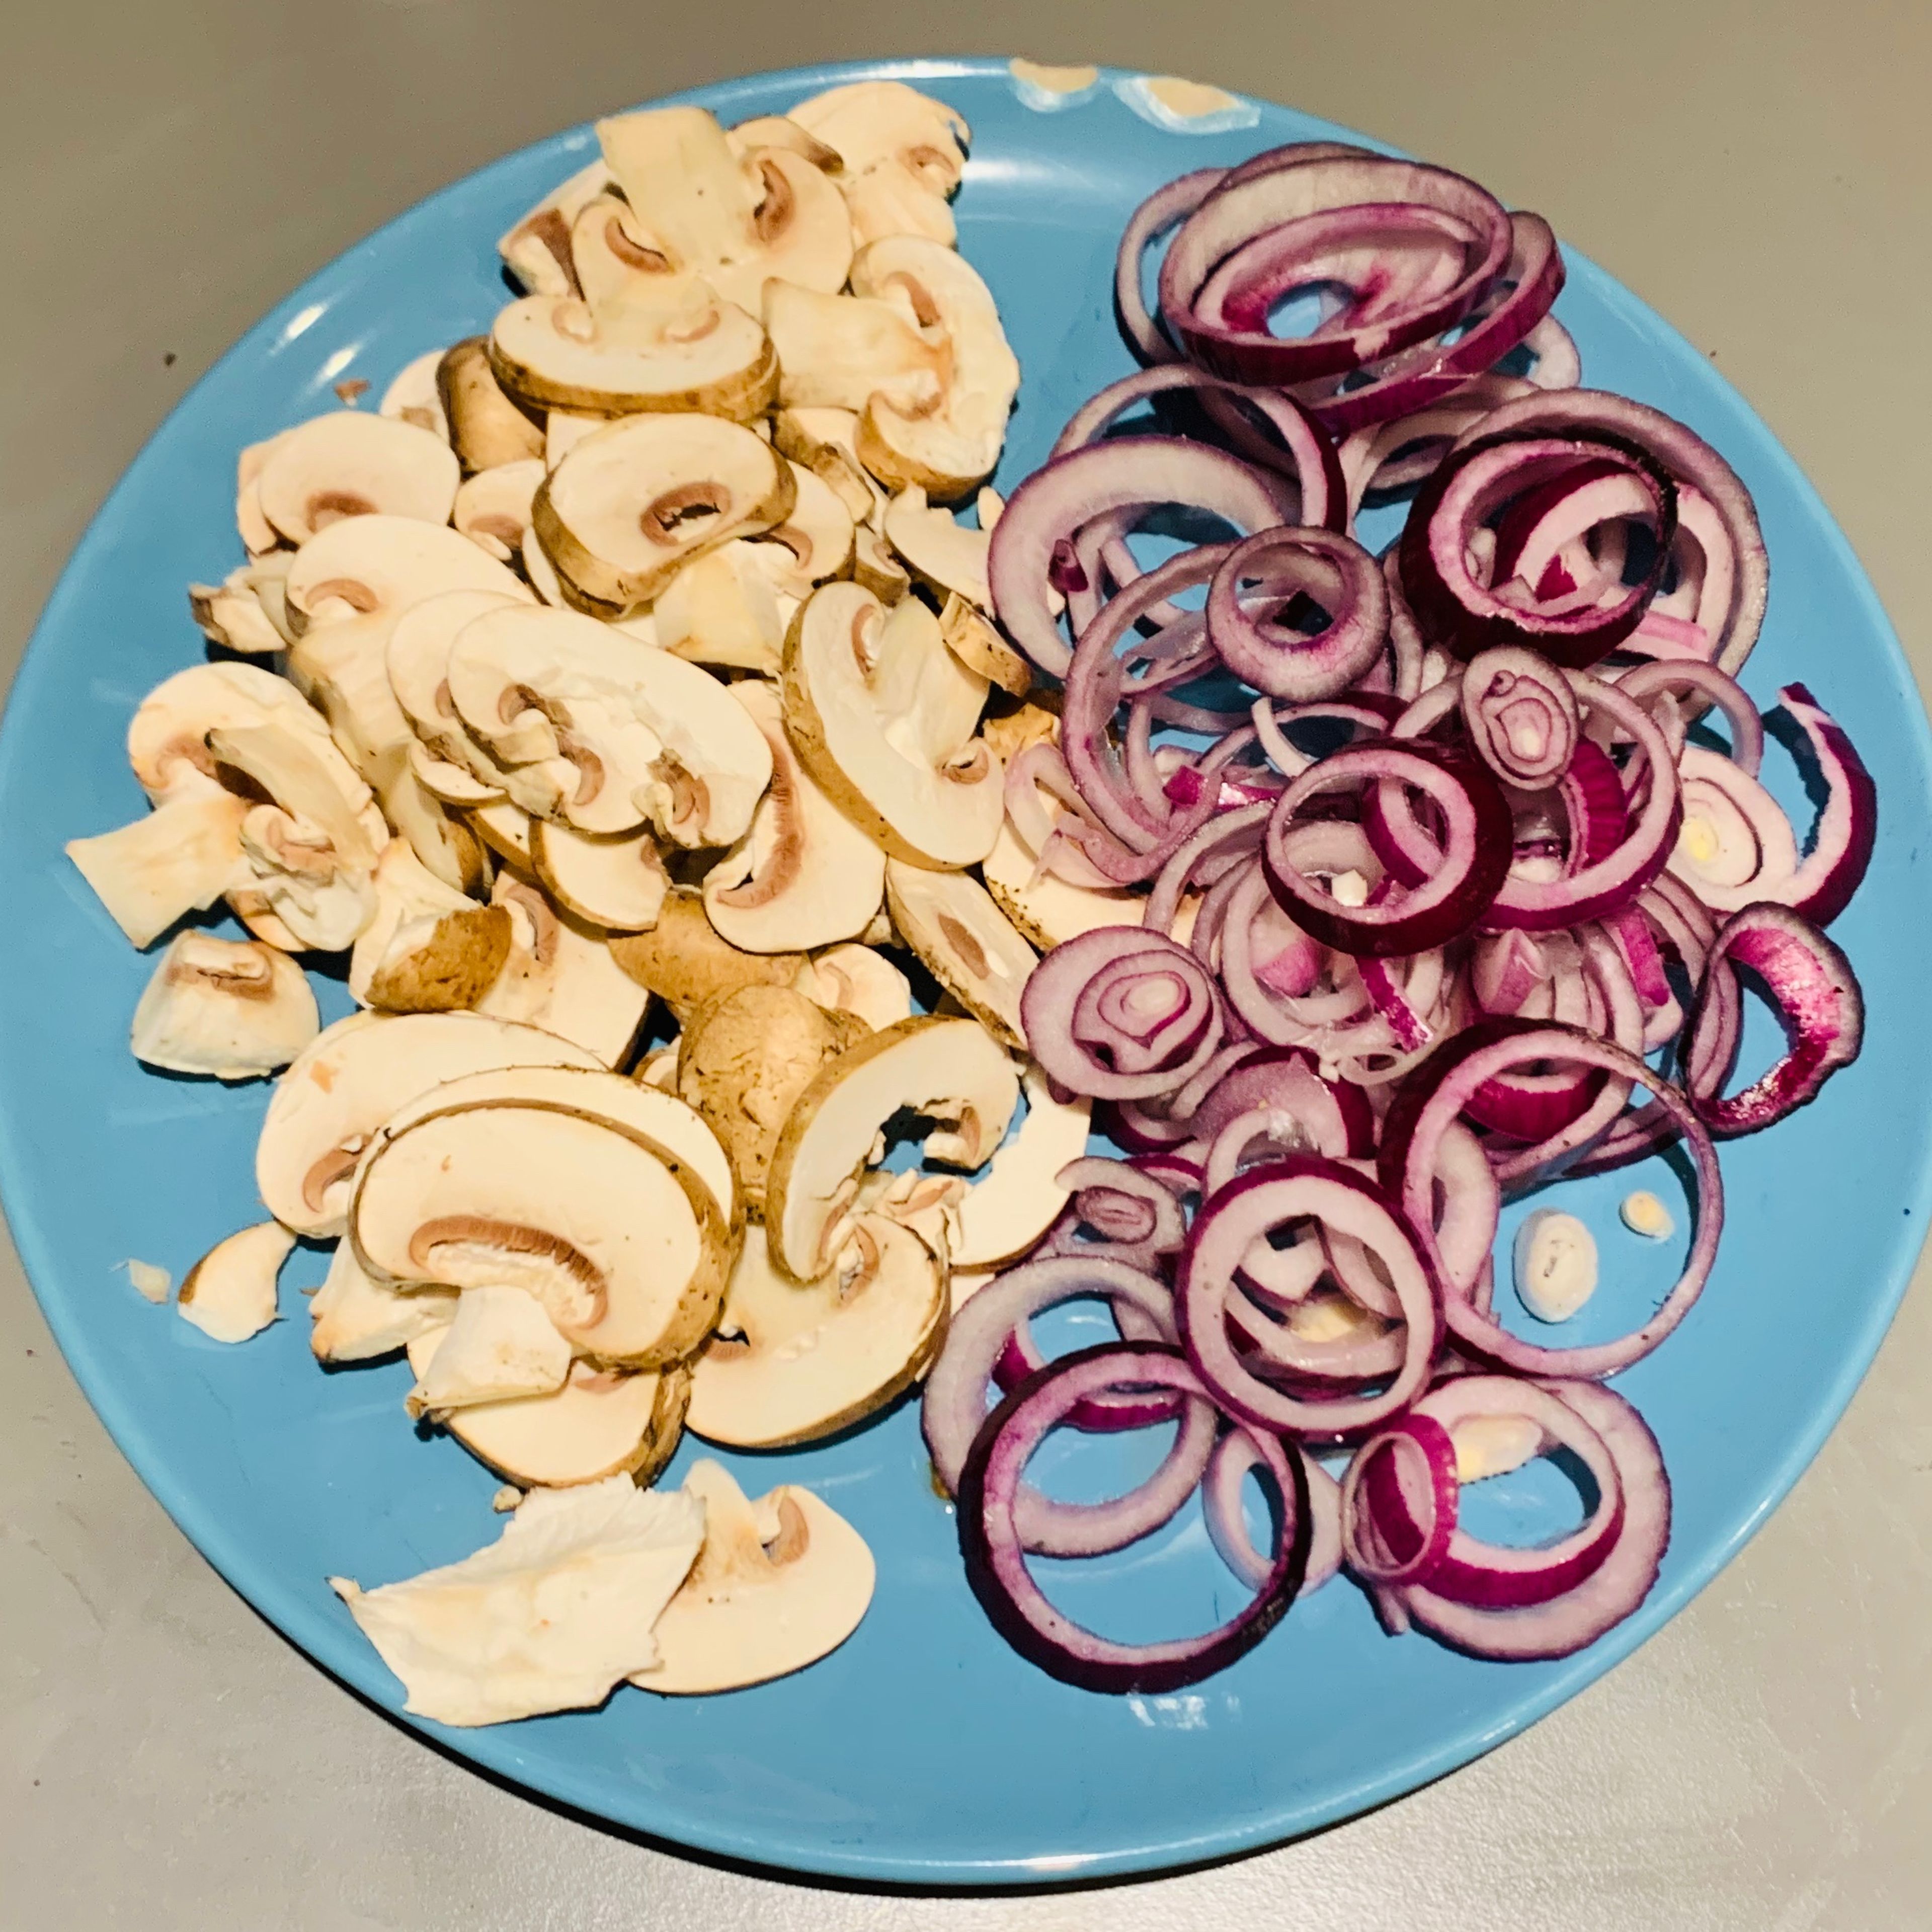 Cut the onions and mushrooms